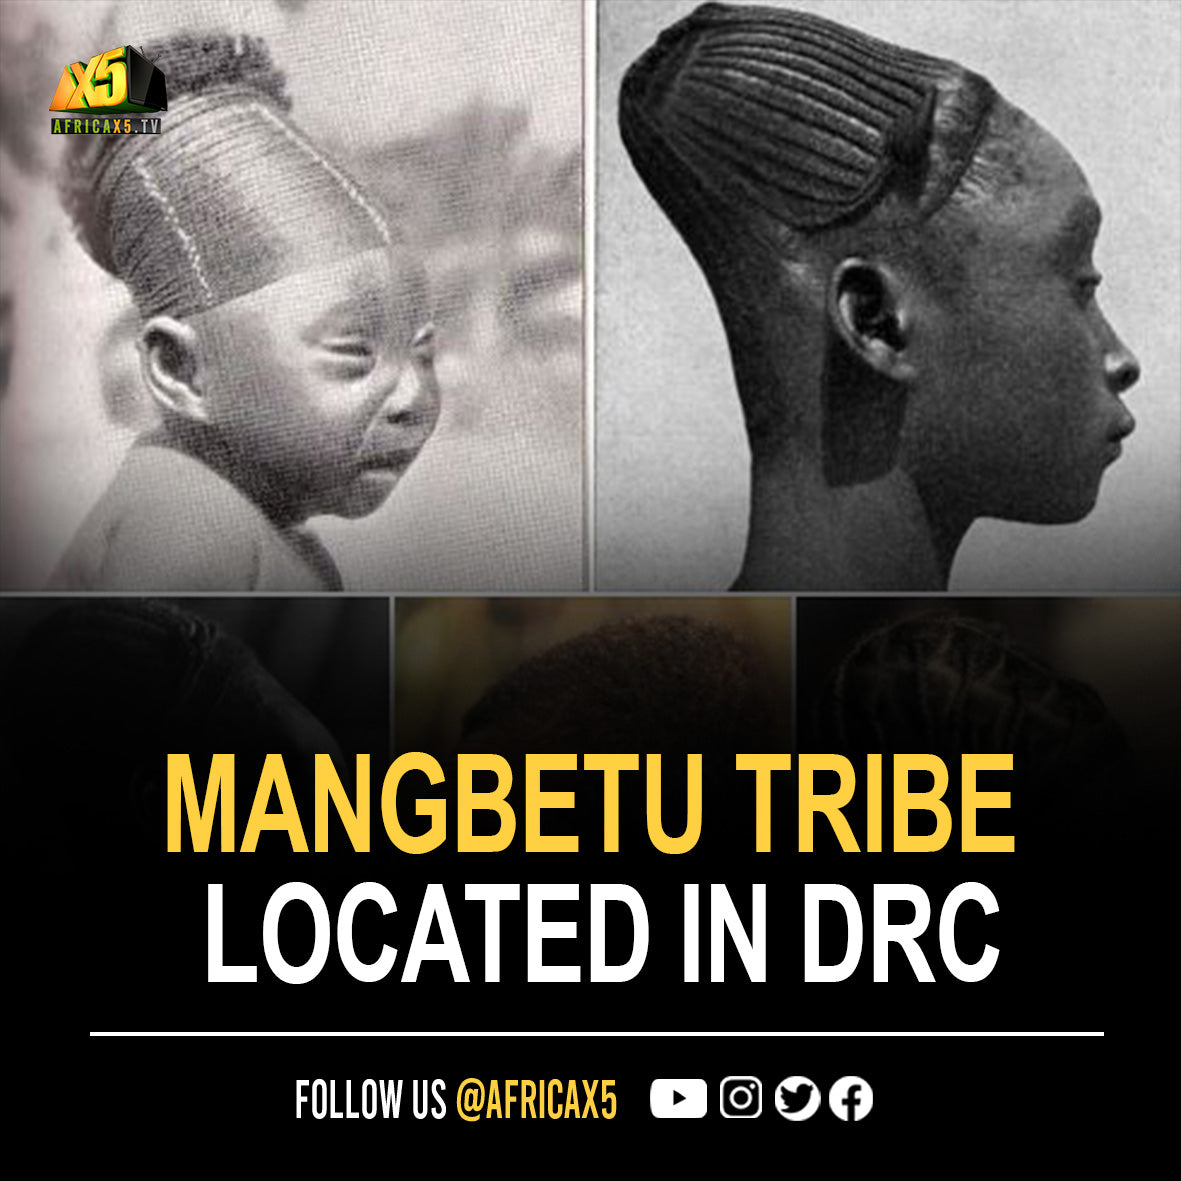 The Mangbetu tribe is an ethnic group located in the northeastern part of the Democratic Republic of the Congo, primarily in the Haut-Uele and Bas-Uele provinces.